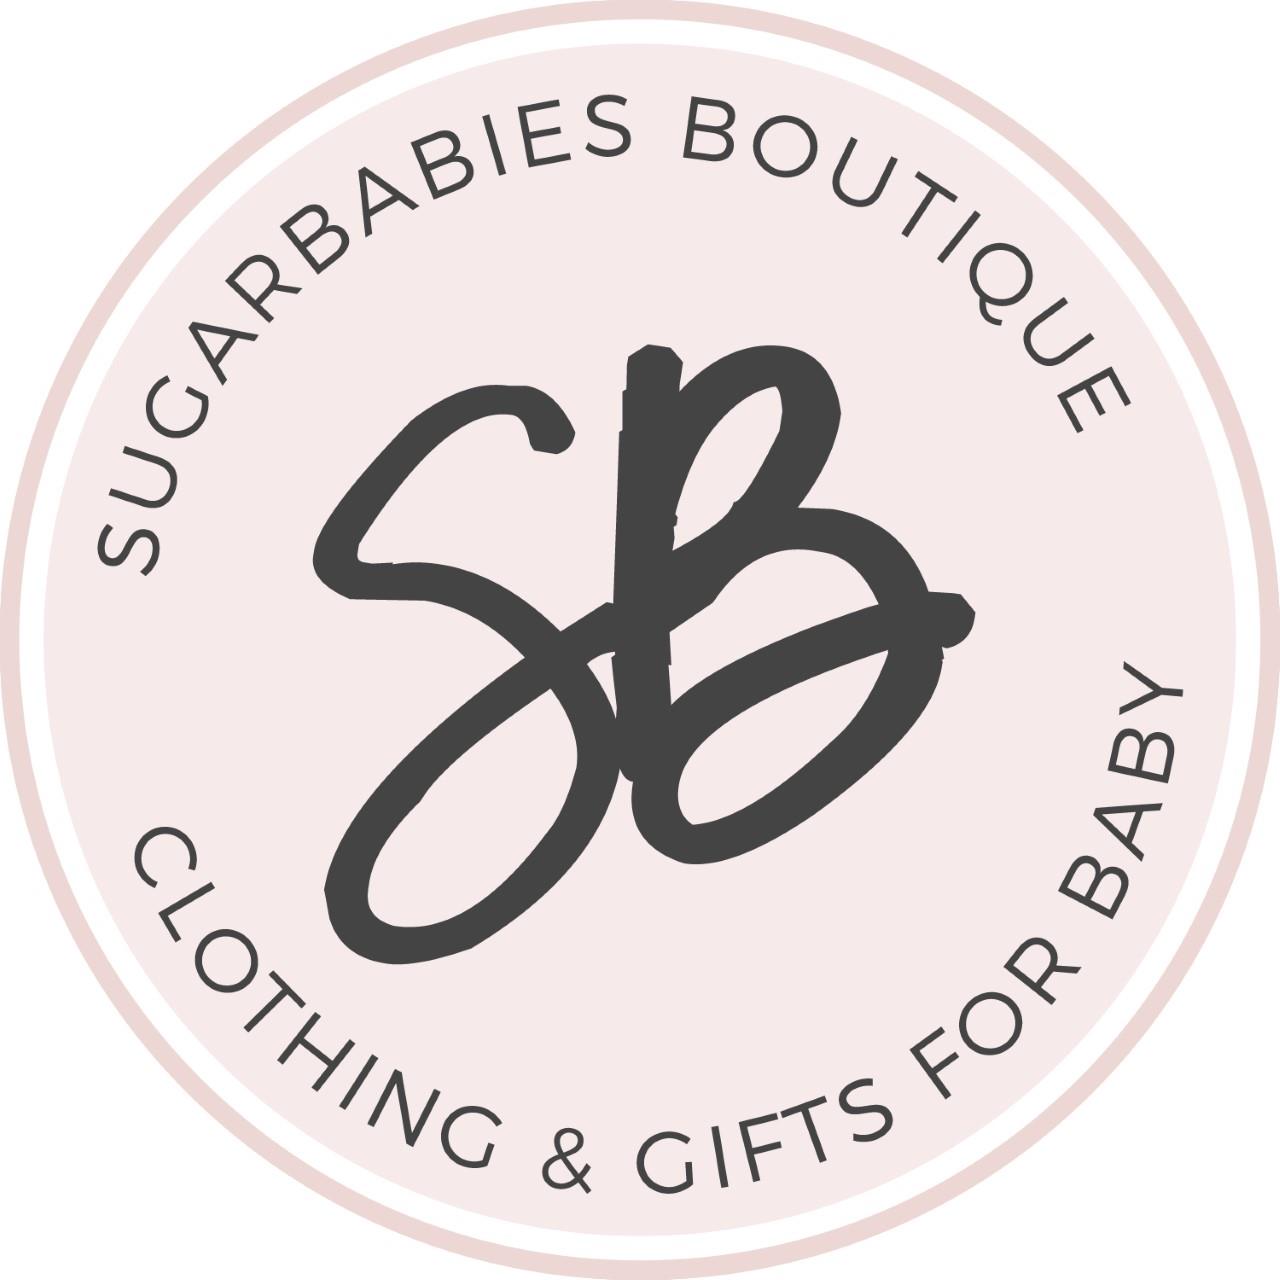 In Partnership with shopsugarbabies.com